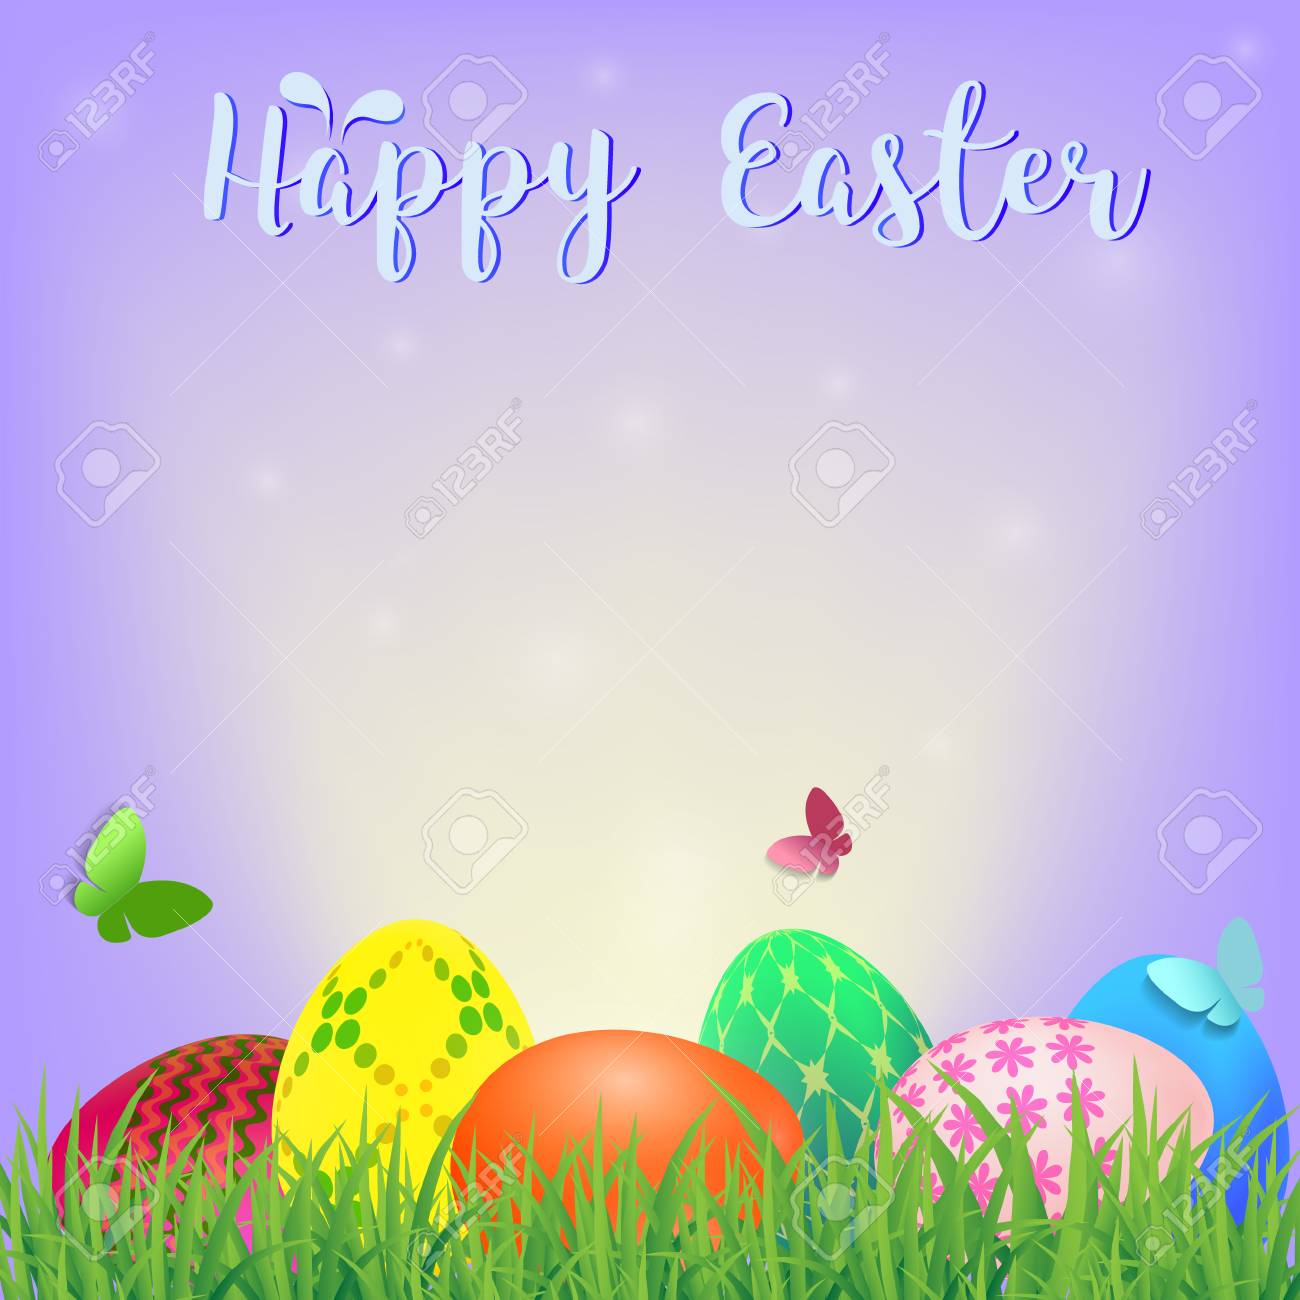 Happy Easter Background With Colorful Decorated Eggs Vector